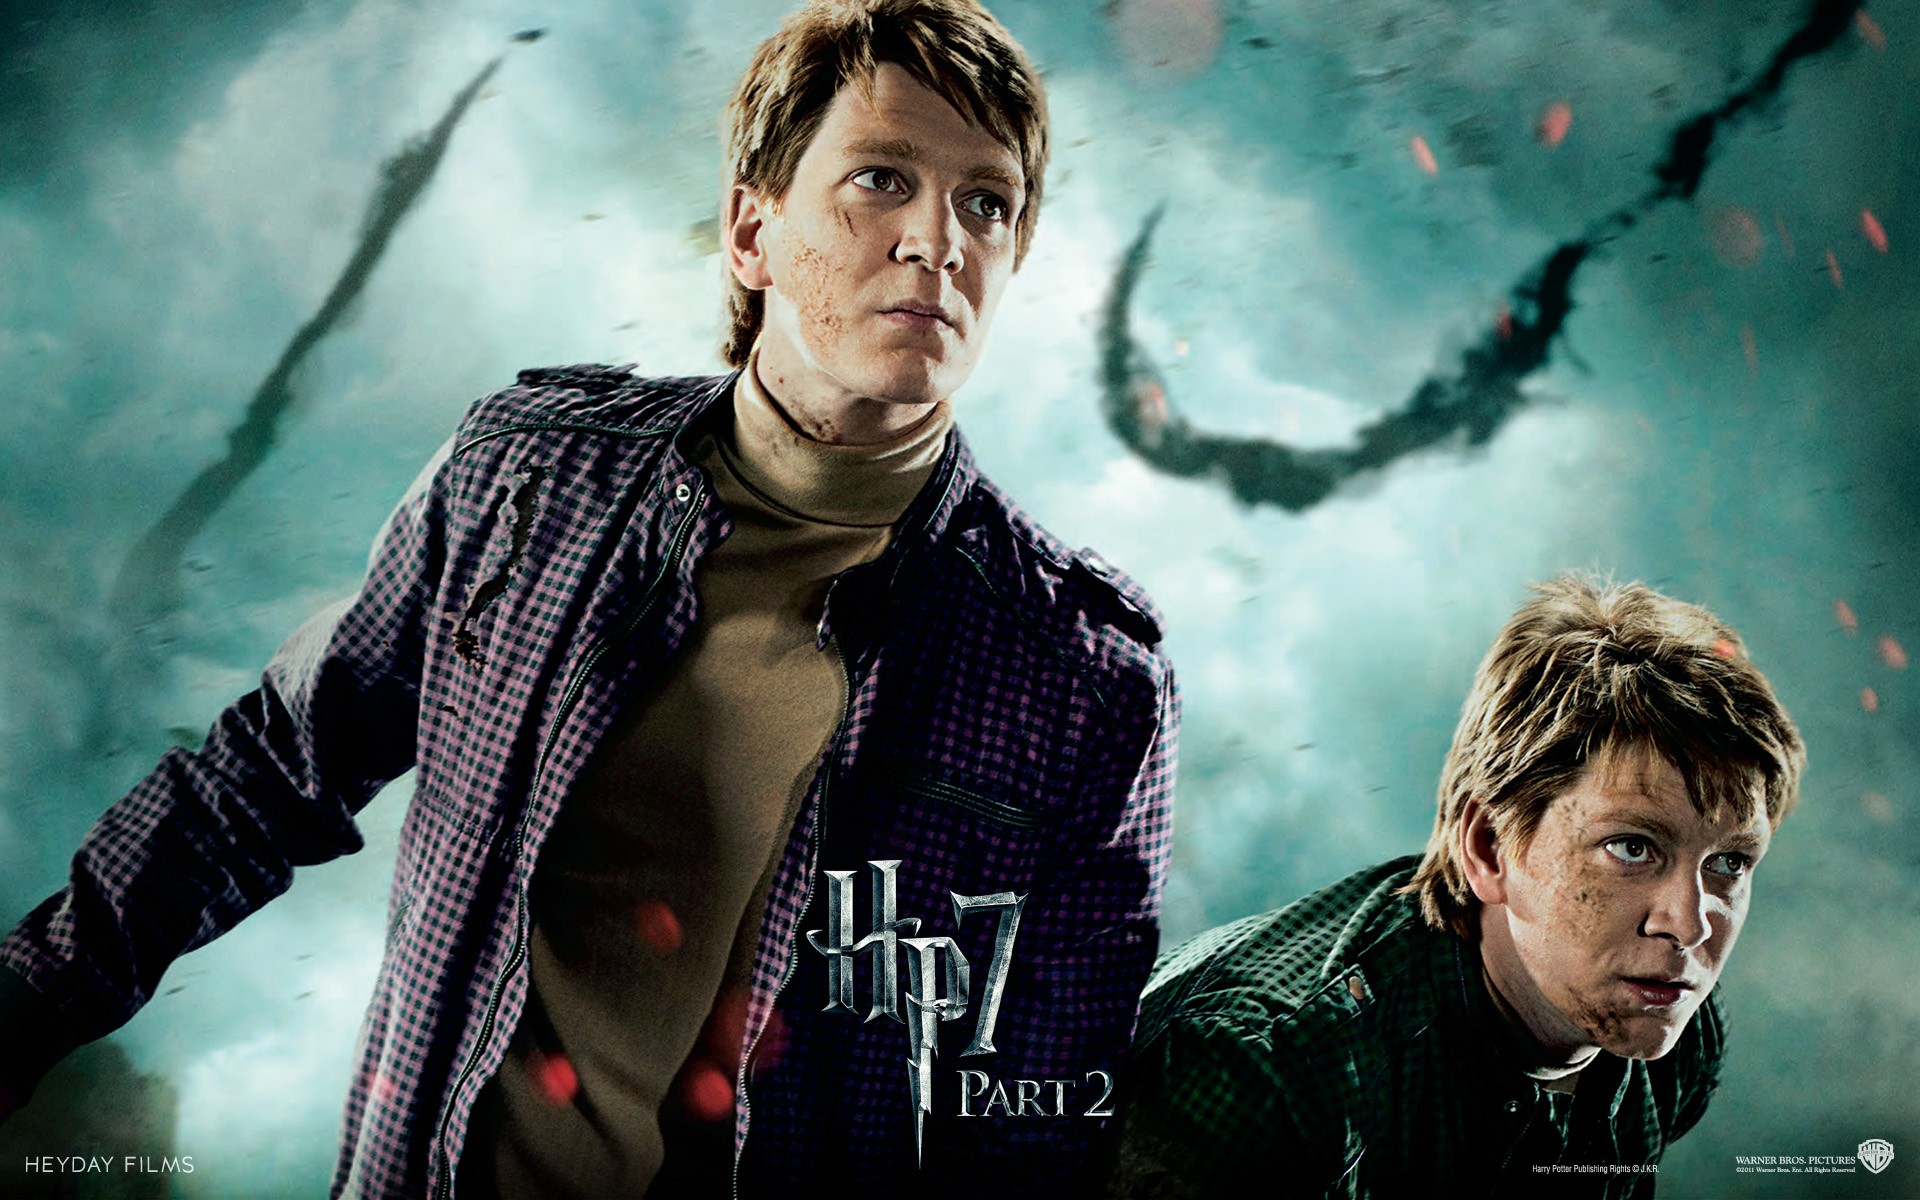 Fantasy movies film harry potter magic harry potter and the deathly hallows movie posters fred weasley george weasley oliver phelps james phelps wallpaper x